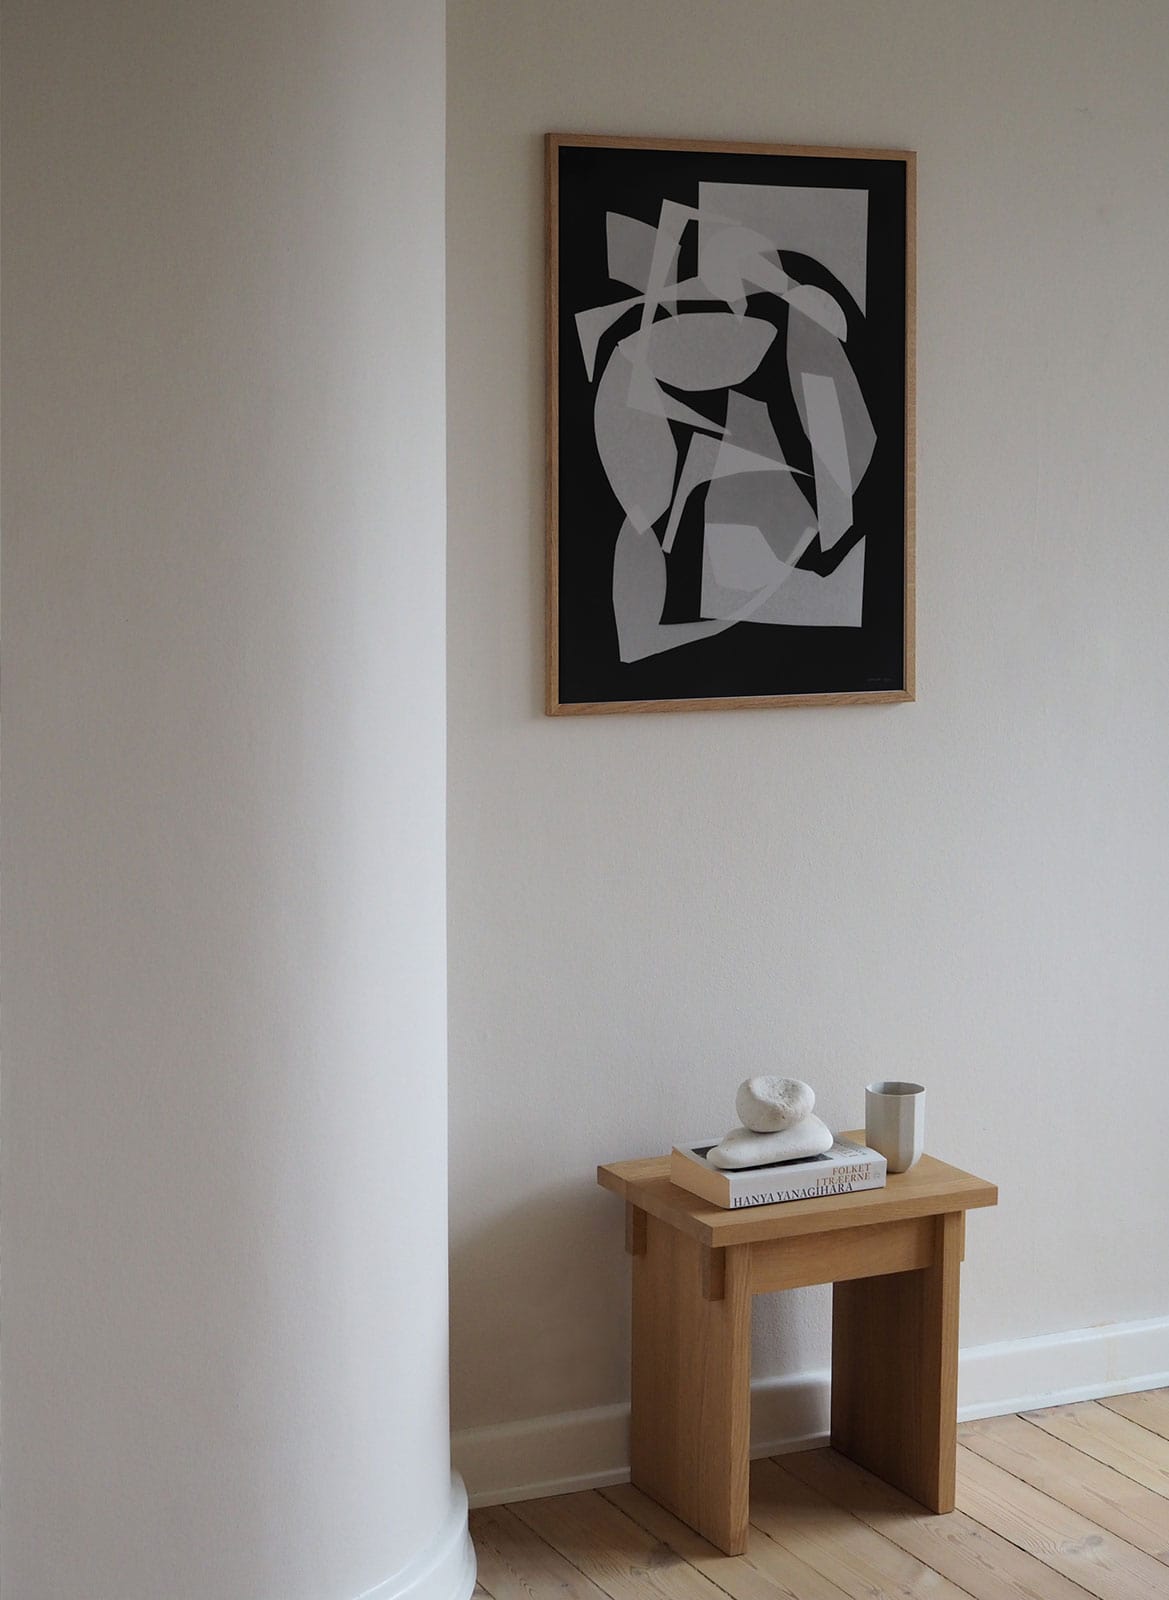 Framed minimalistic poster hanging above a table by Atelier Cph